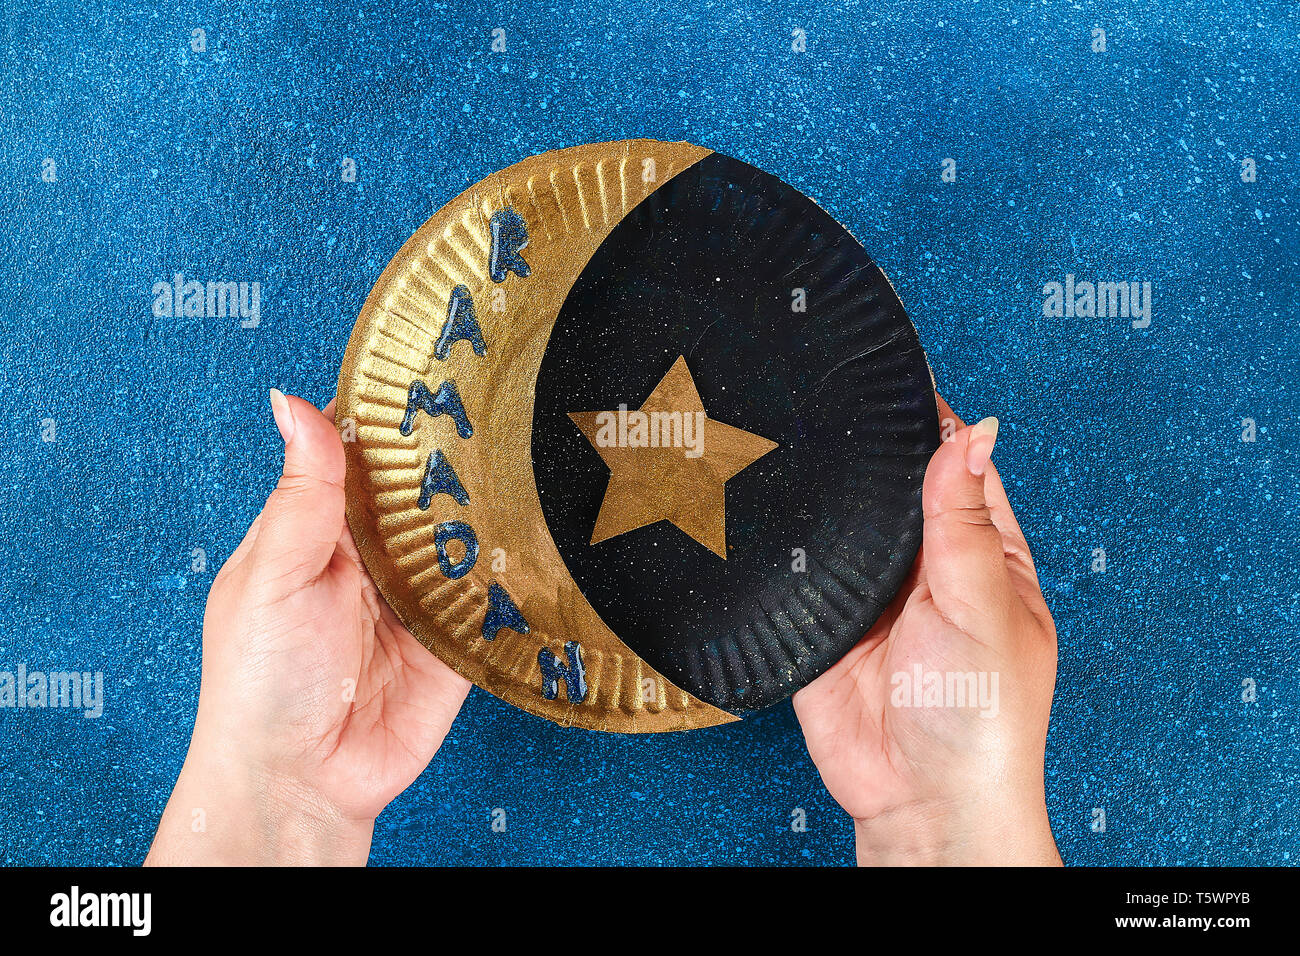 https://c8.alamy.com/comp/T5WPYB/17-diy-ramadan-kareem-crescent-moon-with-a-star-from-a-disposable-cardboard-plate-and-gold-paint-gift-idea-decor-ramadan-kareem-step-by-step-top-v-T5WPYB.jpg